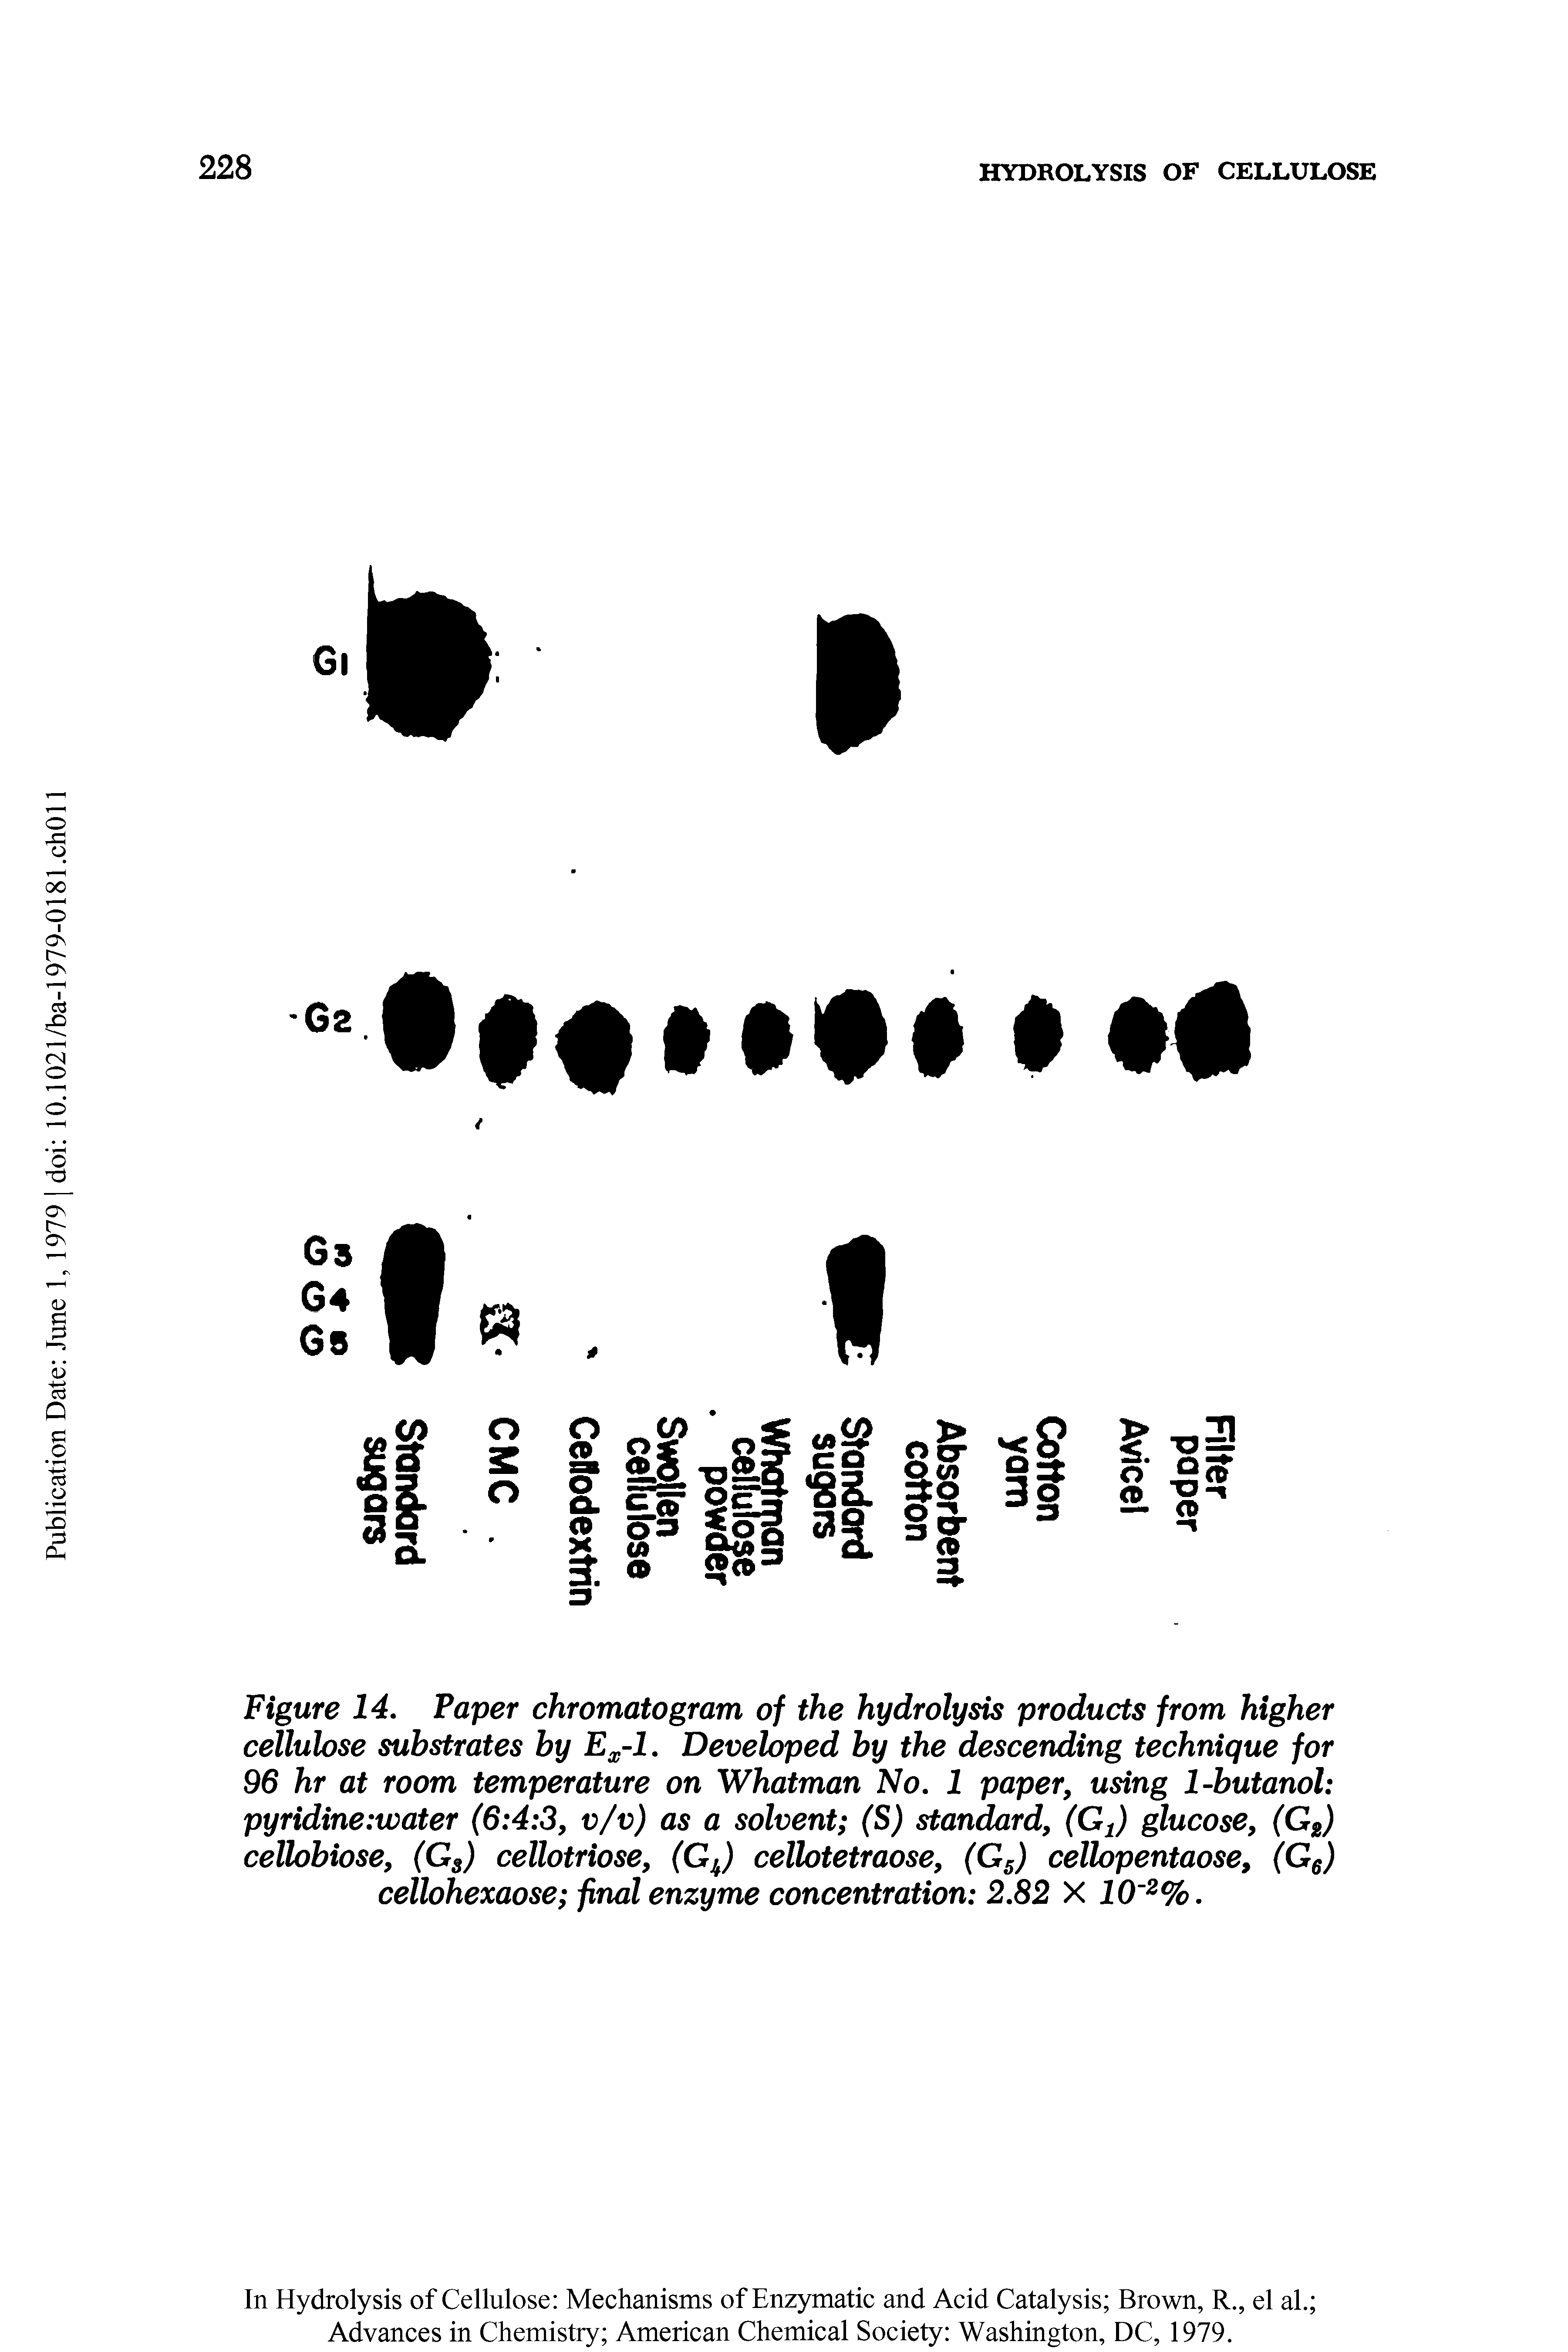 Figure 14. Paper chromatogram of the hydrolysis products from higher cellulose substrates by Ex-1. Developed by the descending technique for 96 hr at room temperature on Whatman No. 1 paper, using 1-butanol pyridine water (6 4 3, v/v) as a solvent (S) standard, (Gt) glucose, (Gz) cellobiose, (Gs) cellotriose, (Gu) cellotetraose, (G5) cellopentaose, (G6) cellohexaose final enzyme concentration 2.82 X 10 2%.